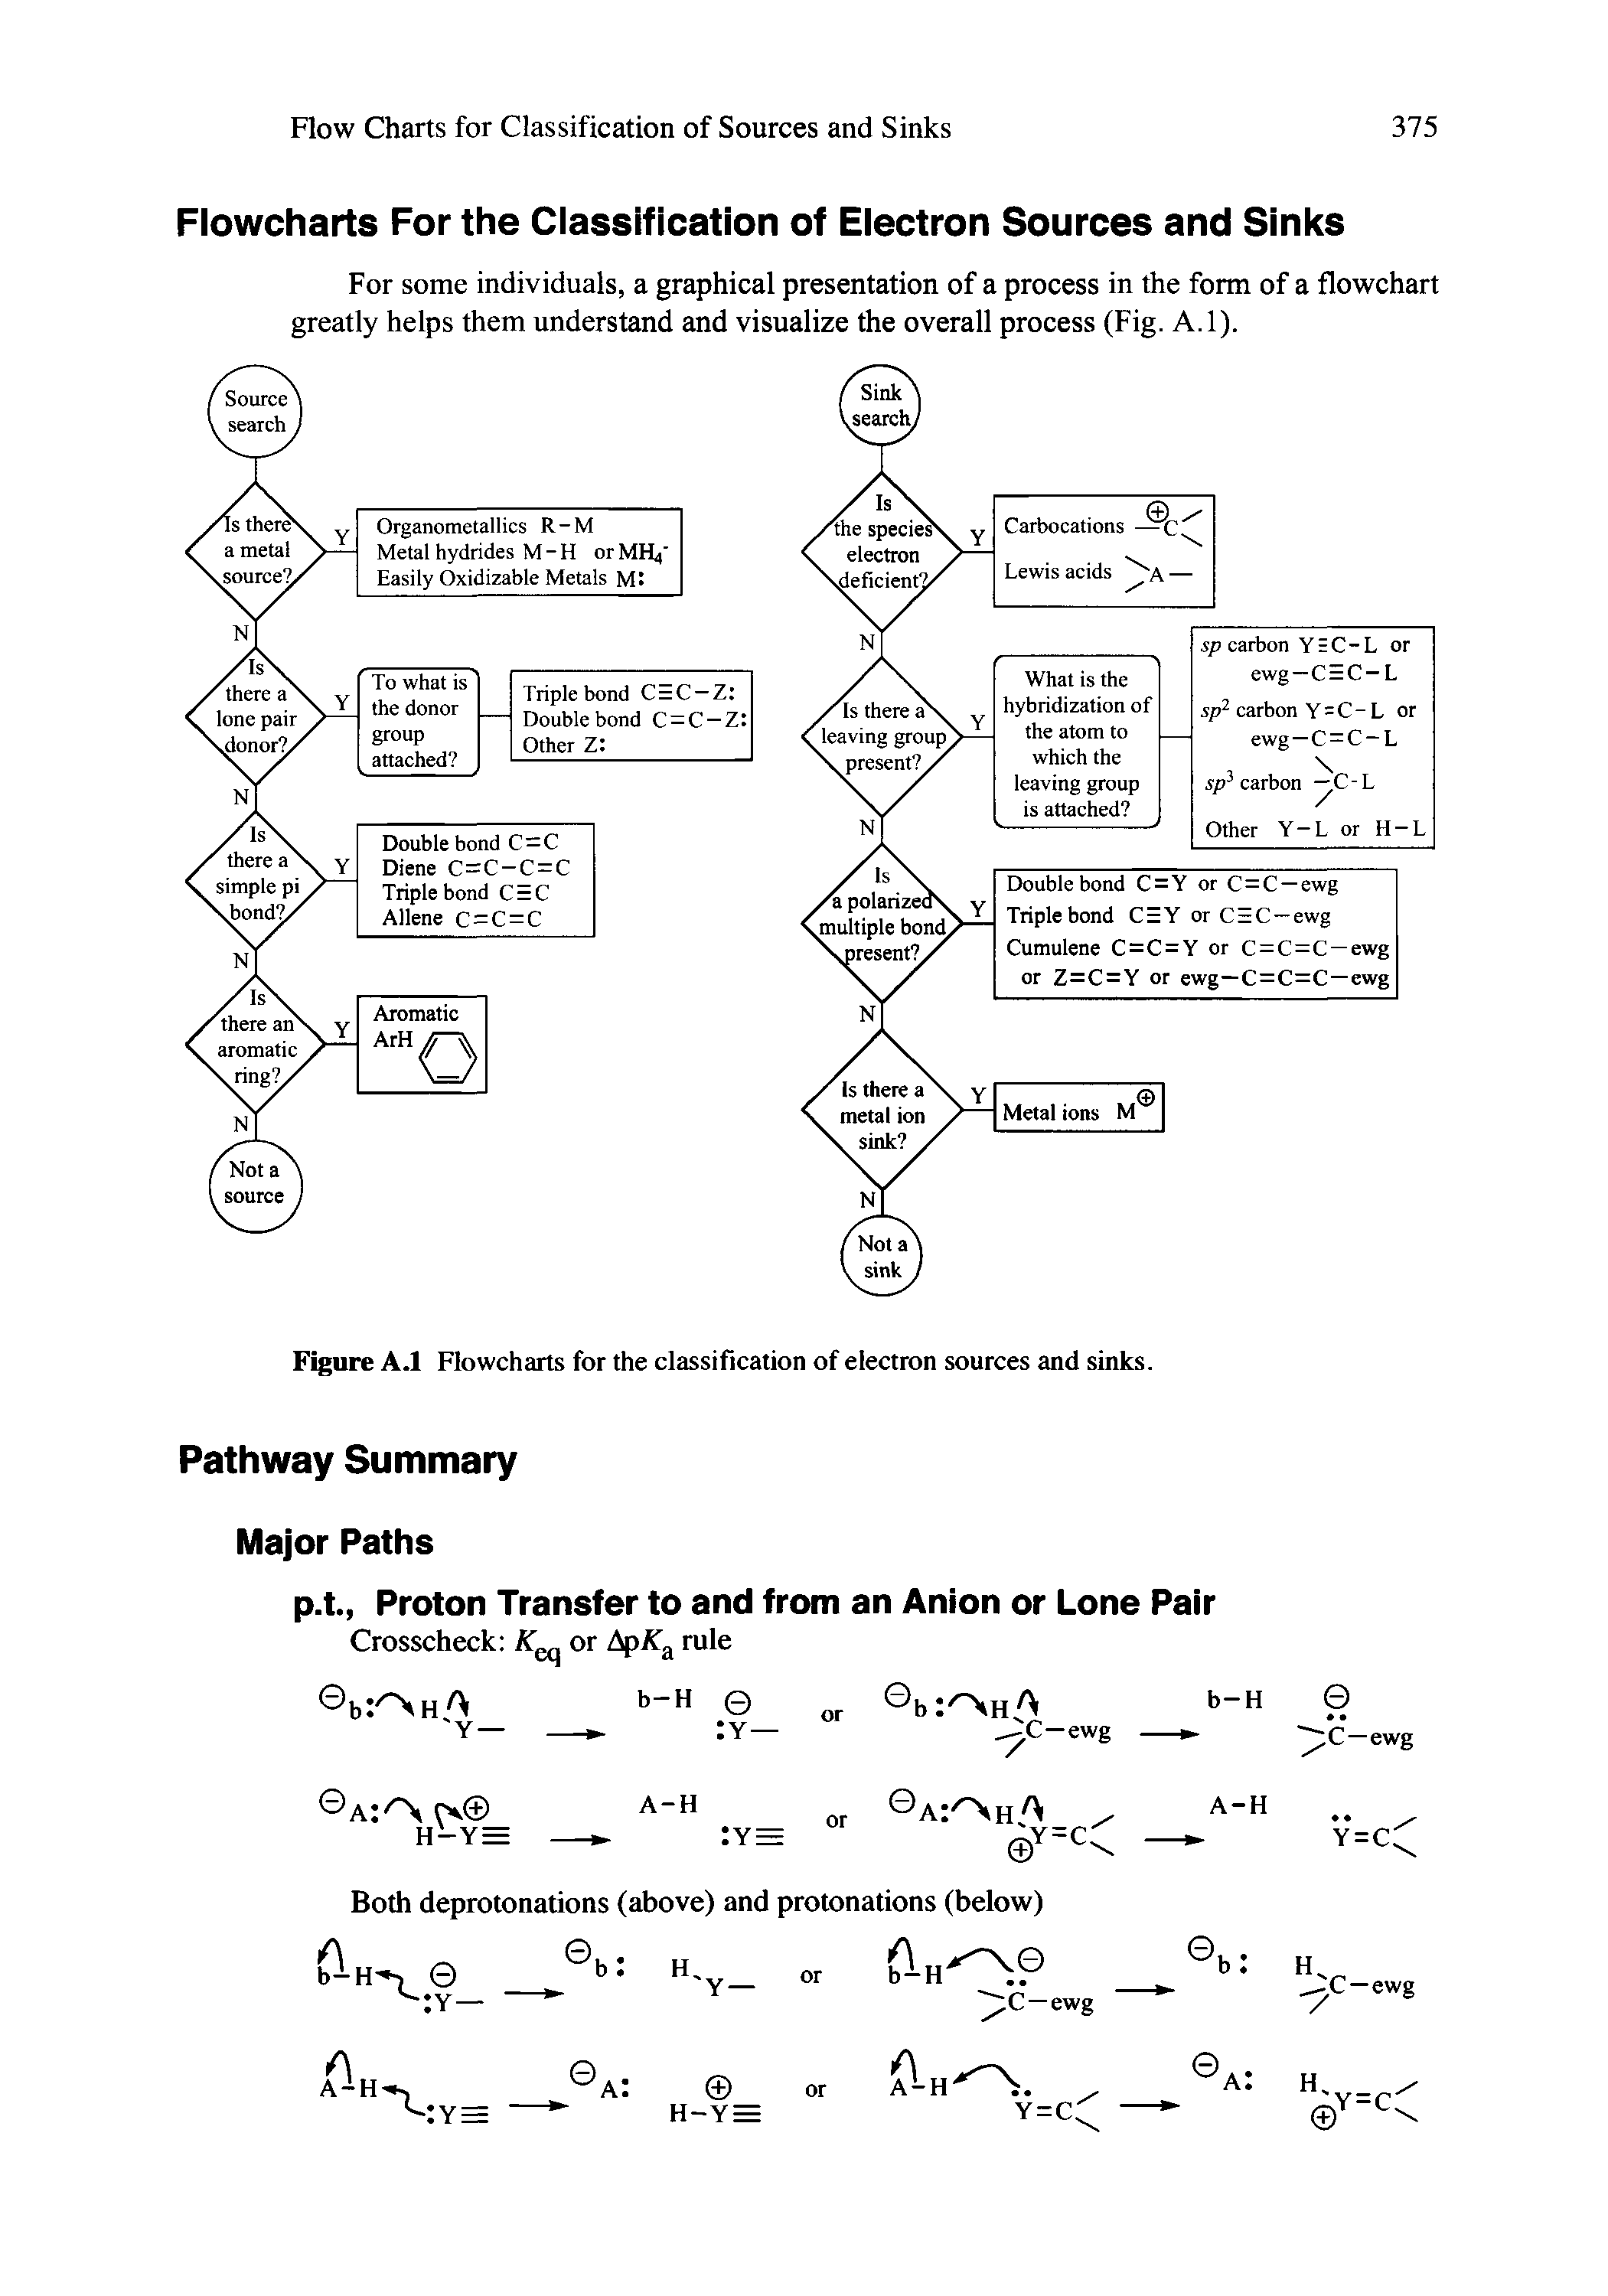 Figure A.l Flowcharts for the classification of electron sources and sinks.